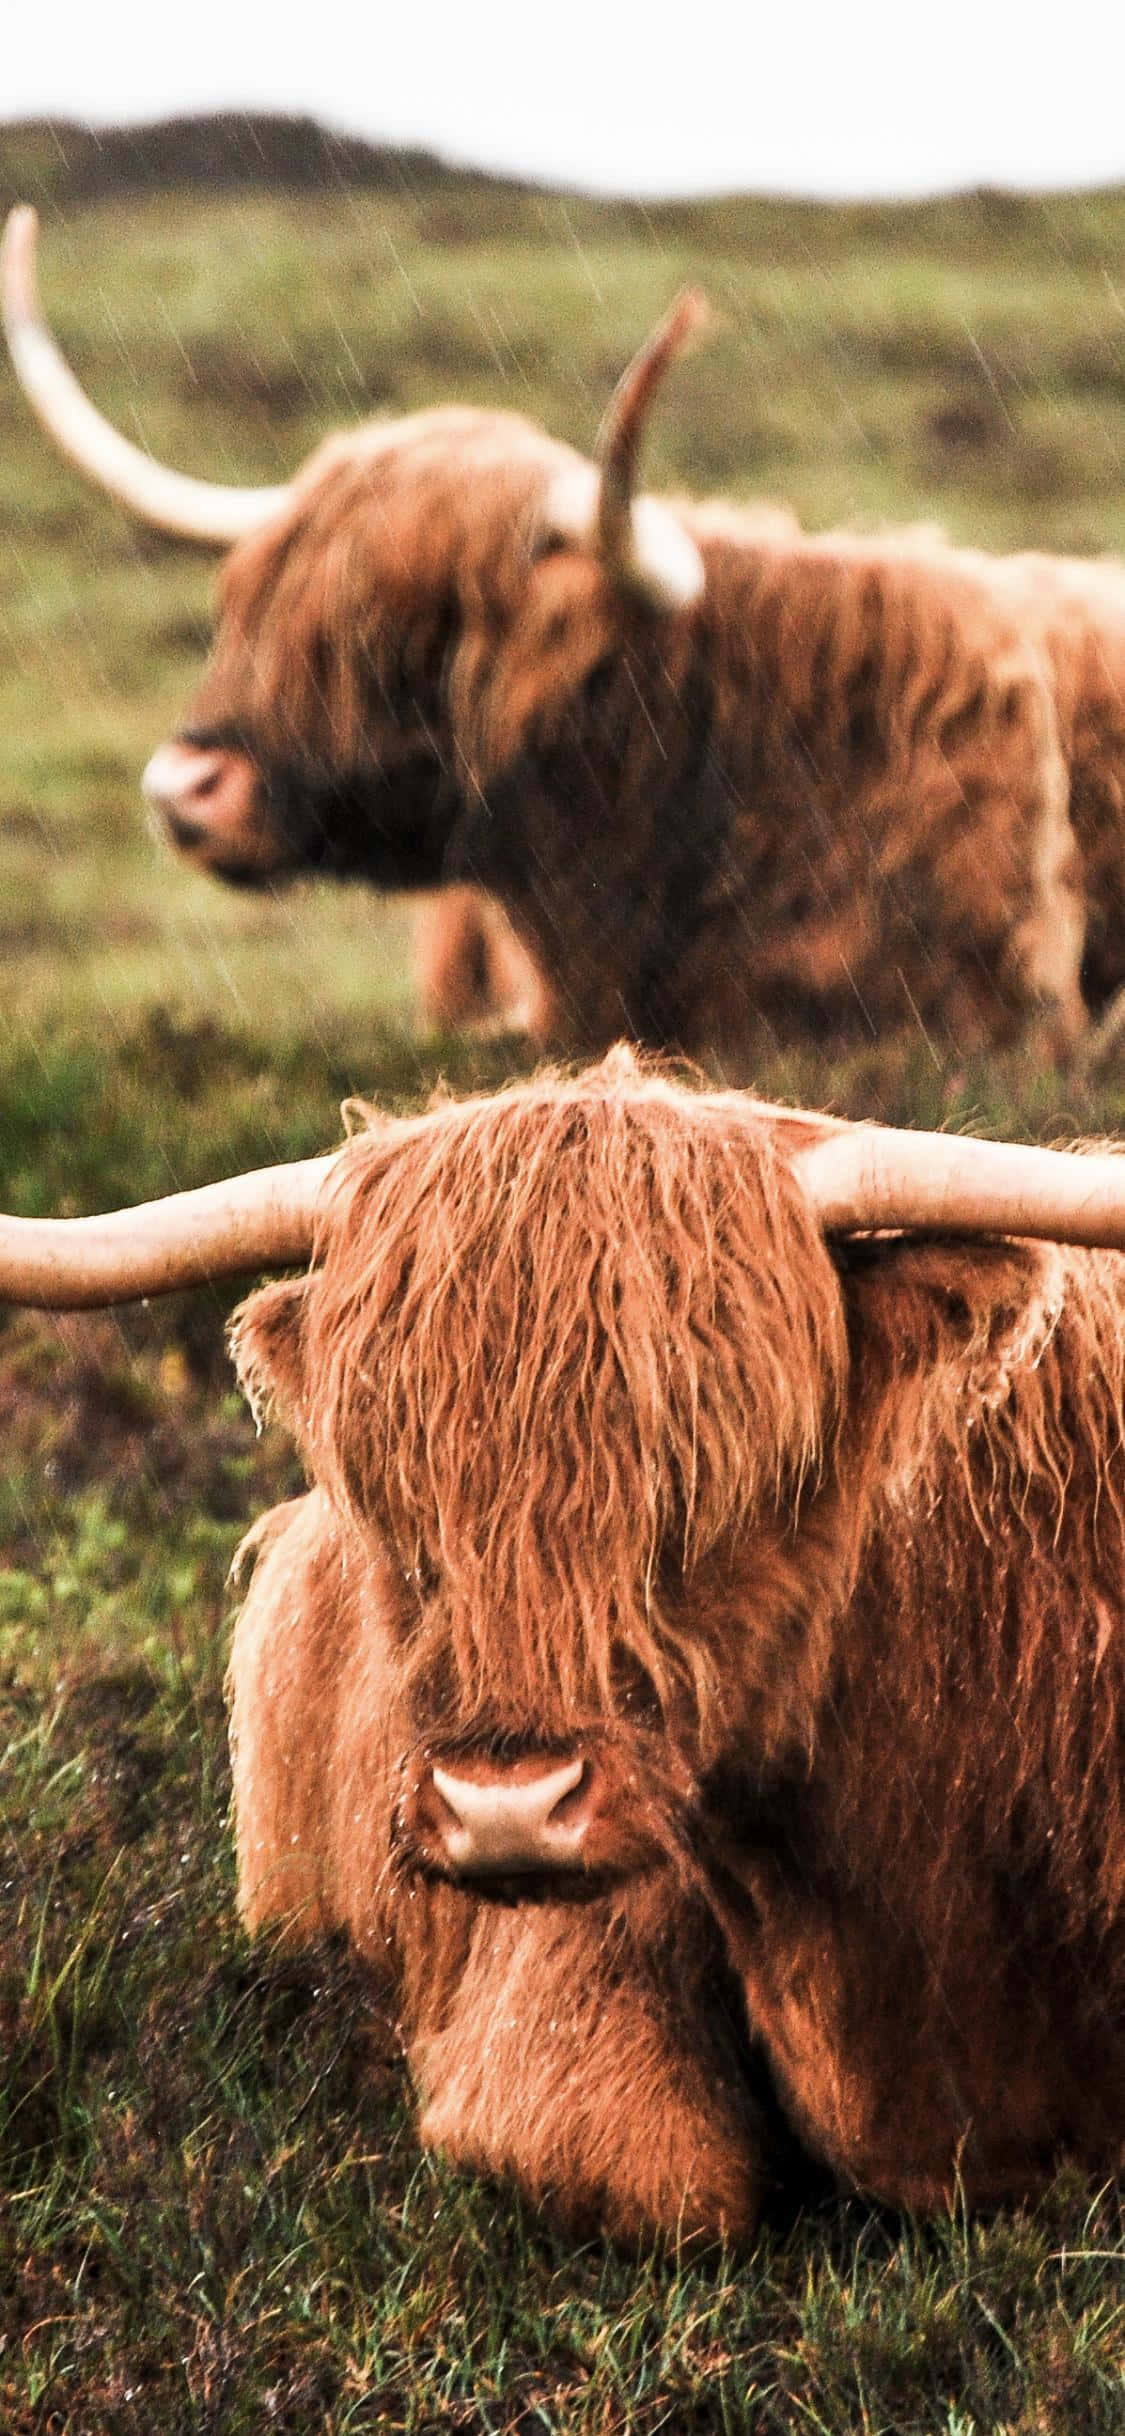 Majestic Highland Cow in the Wild